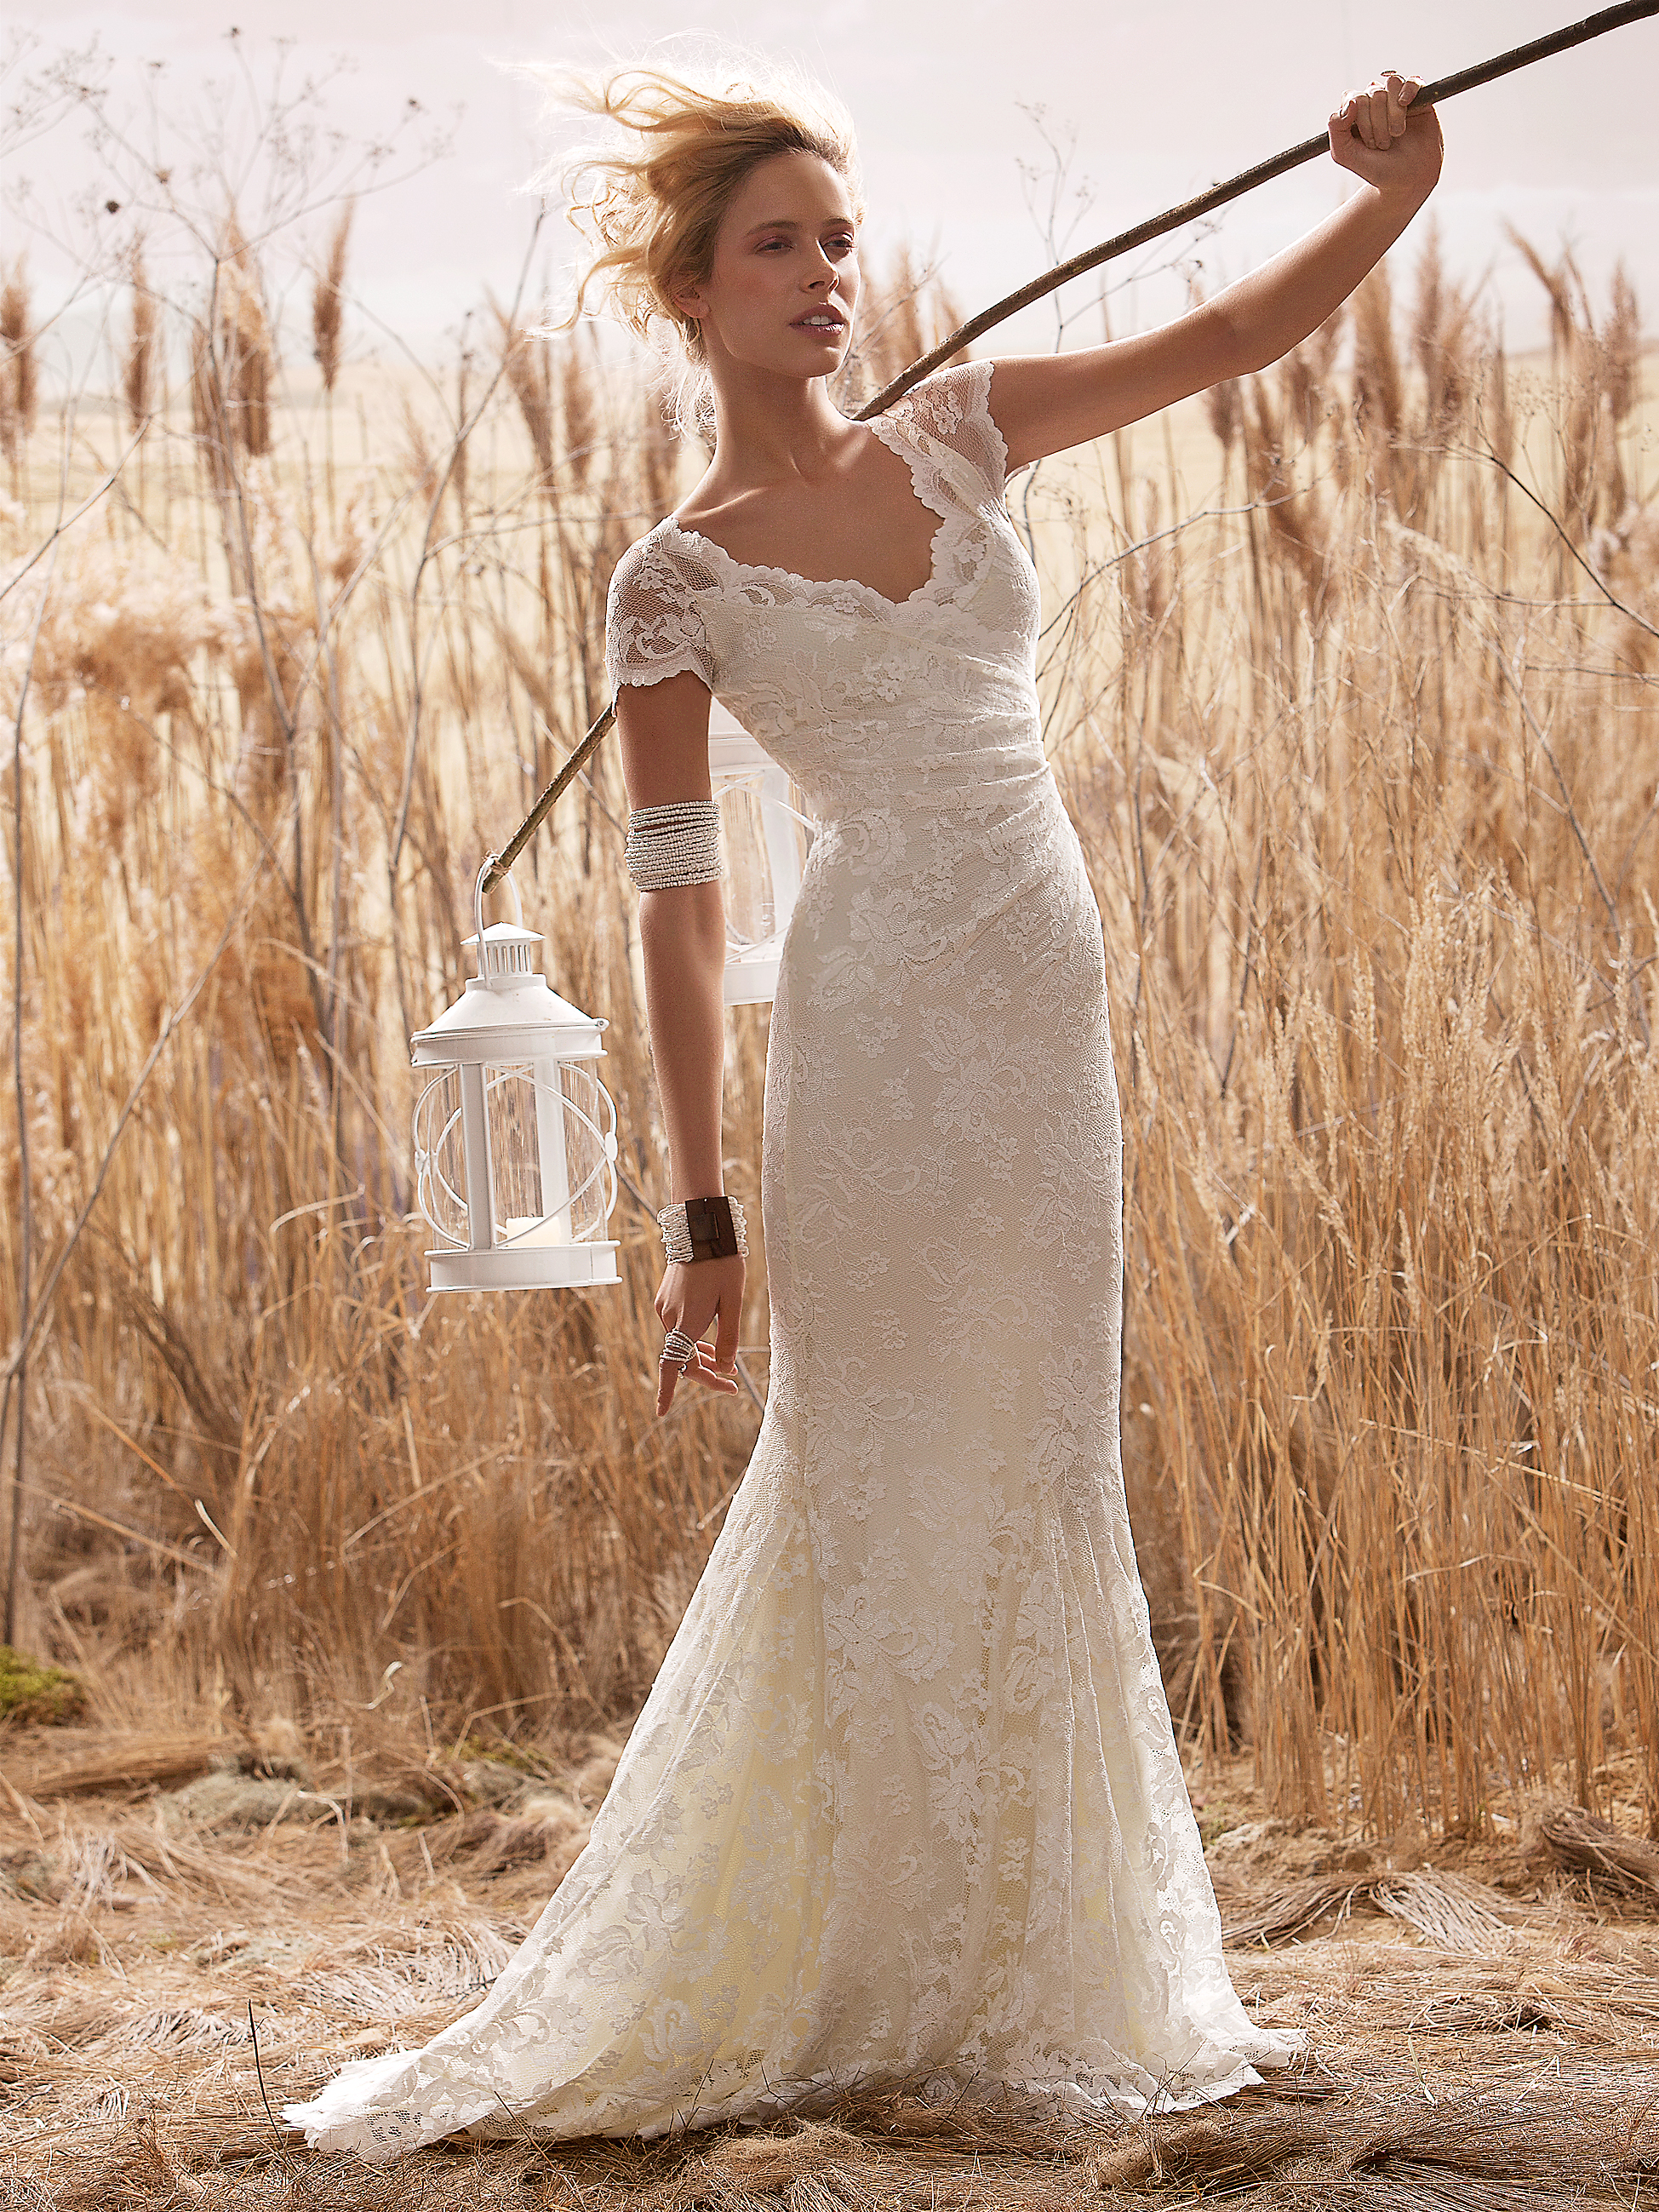 Wedding Gowns From Olvi39;s  Rustic Wedding Chic